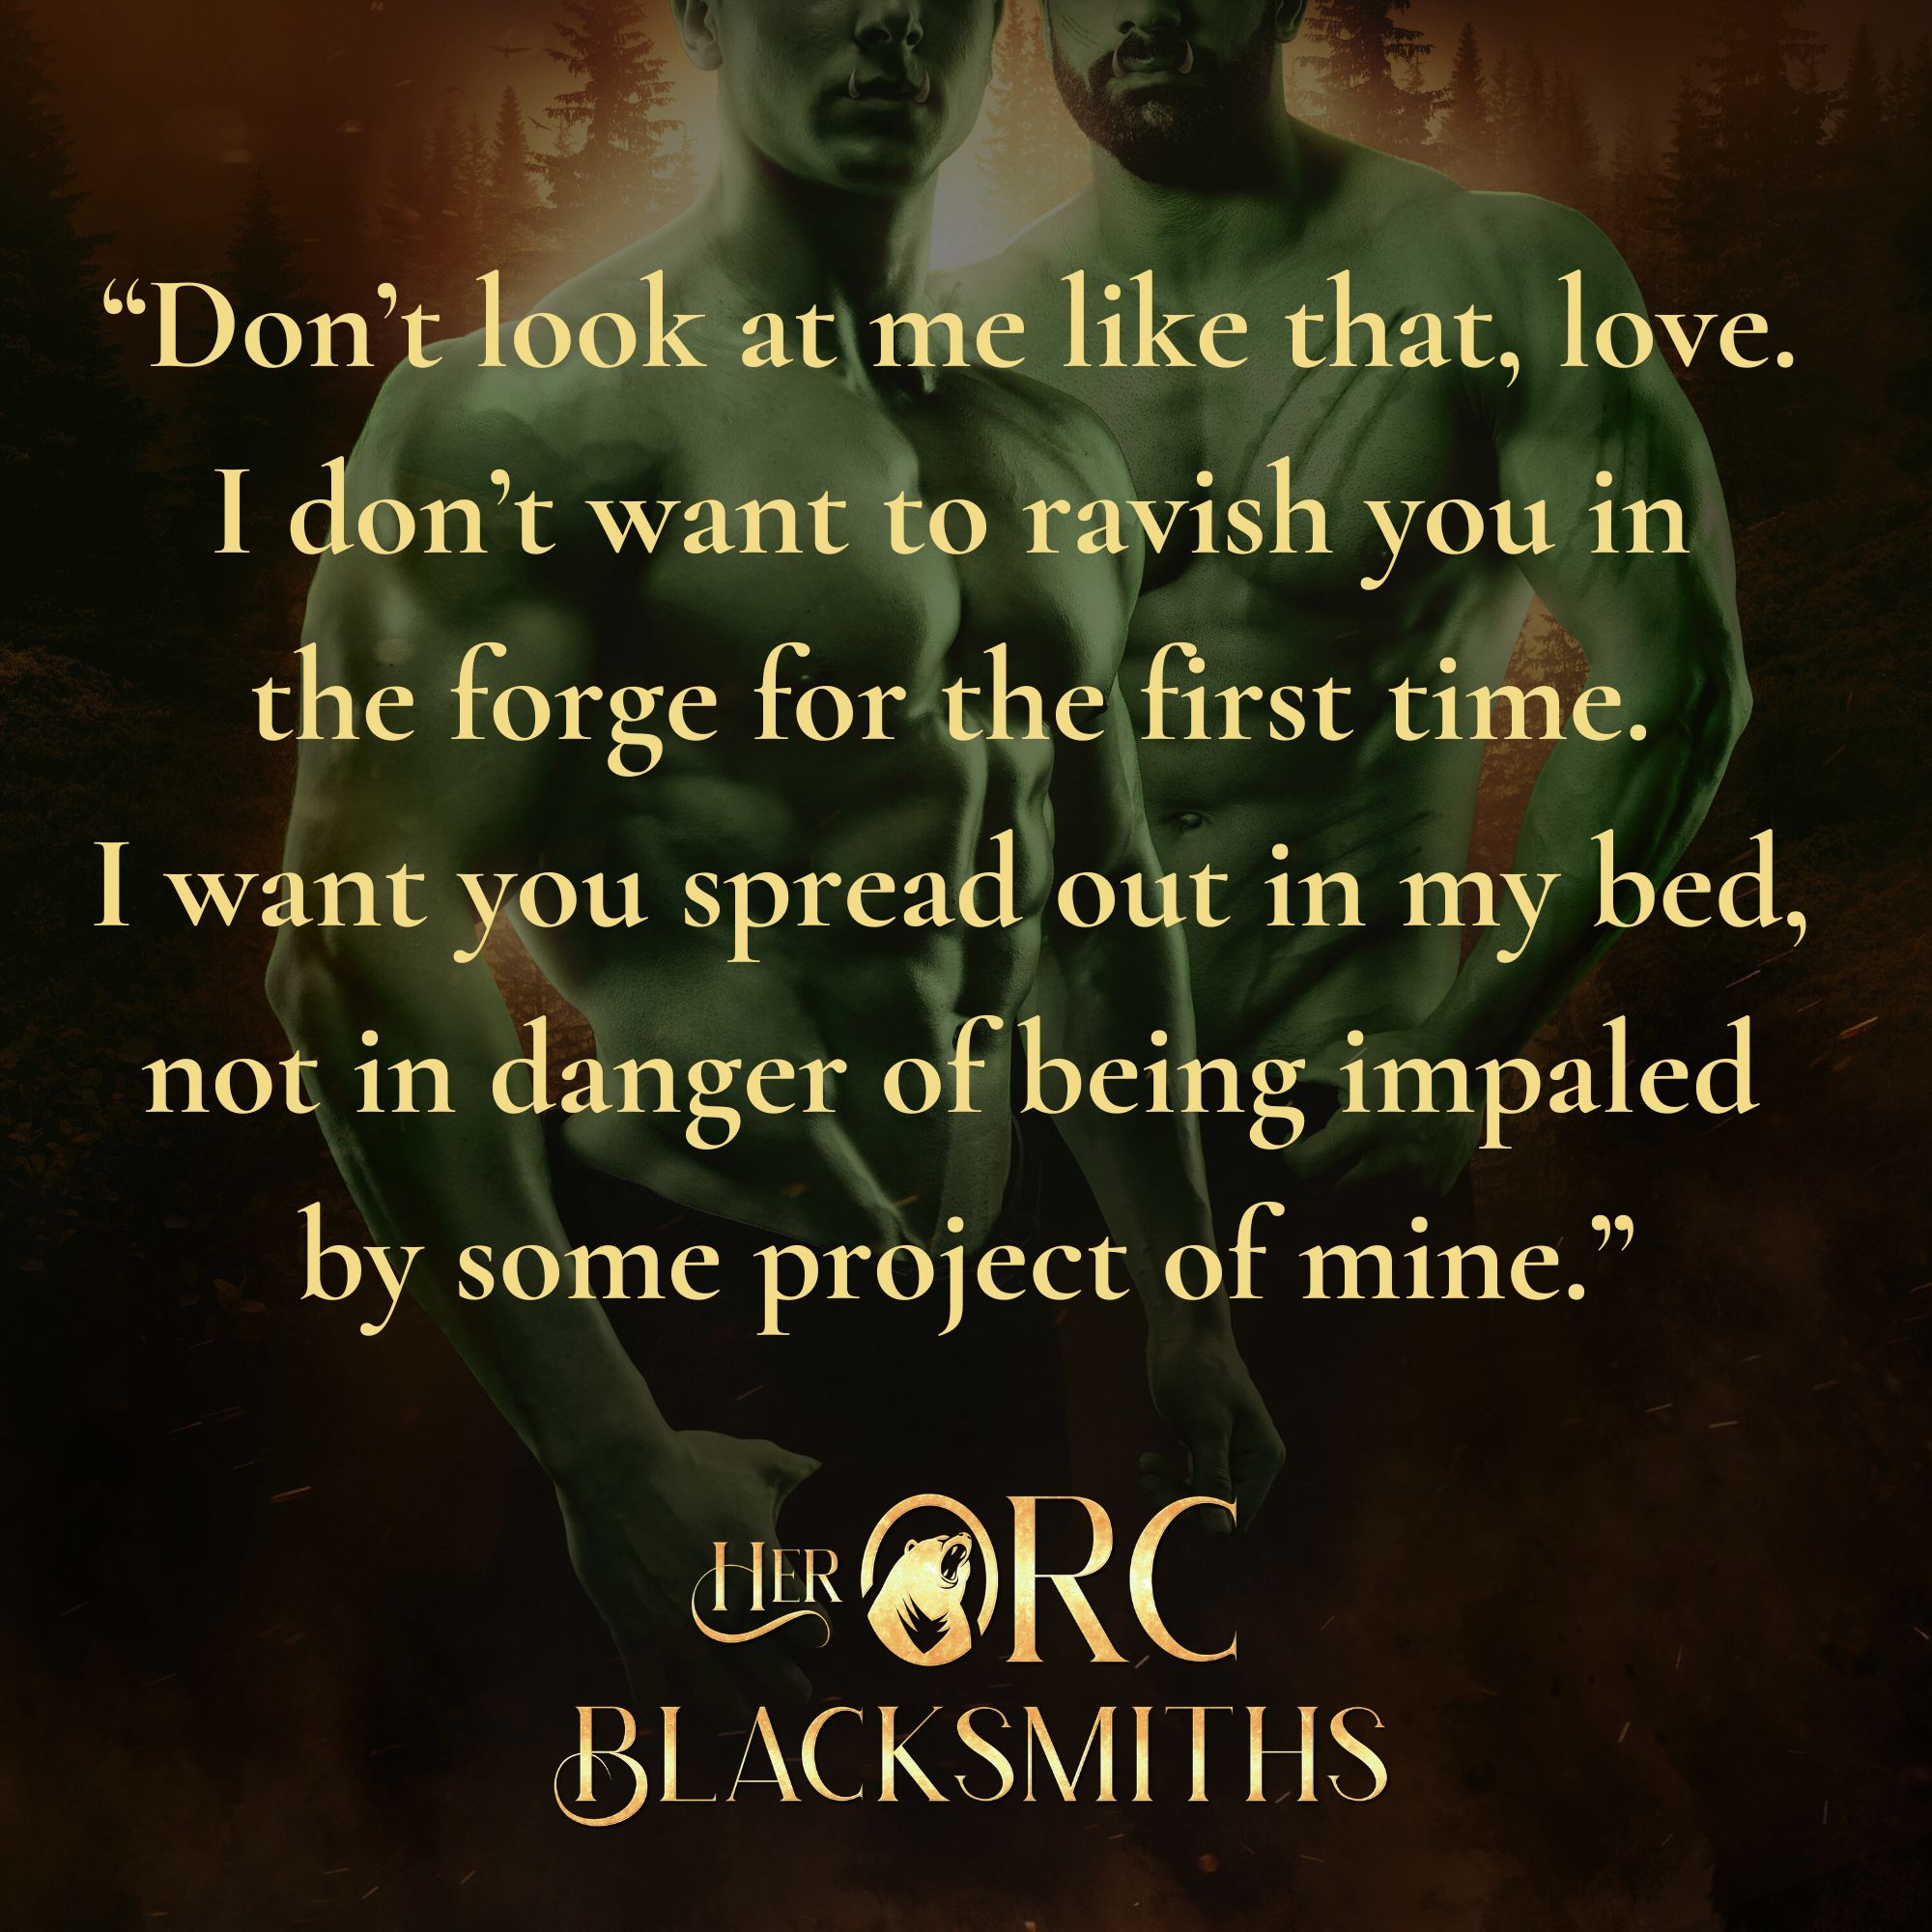 Her Orc Blacksmiths by Zoe Ashwood